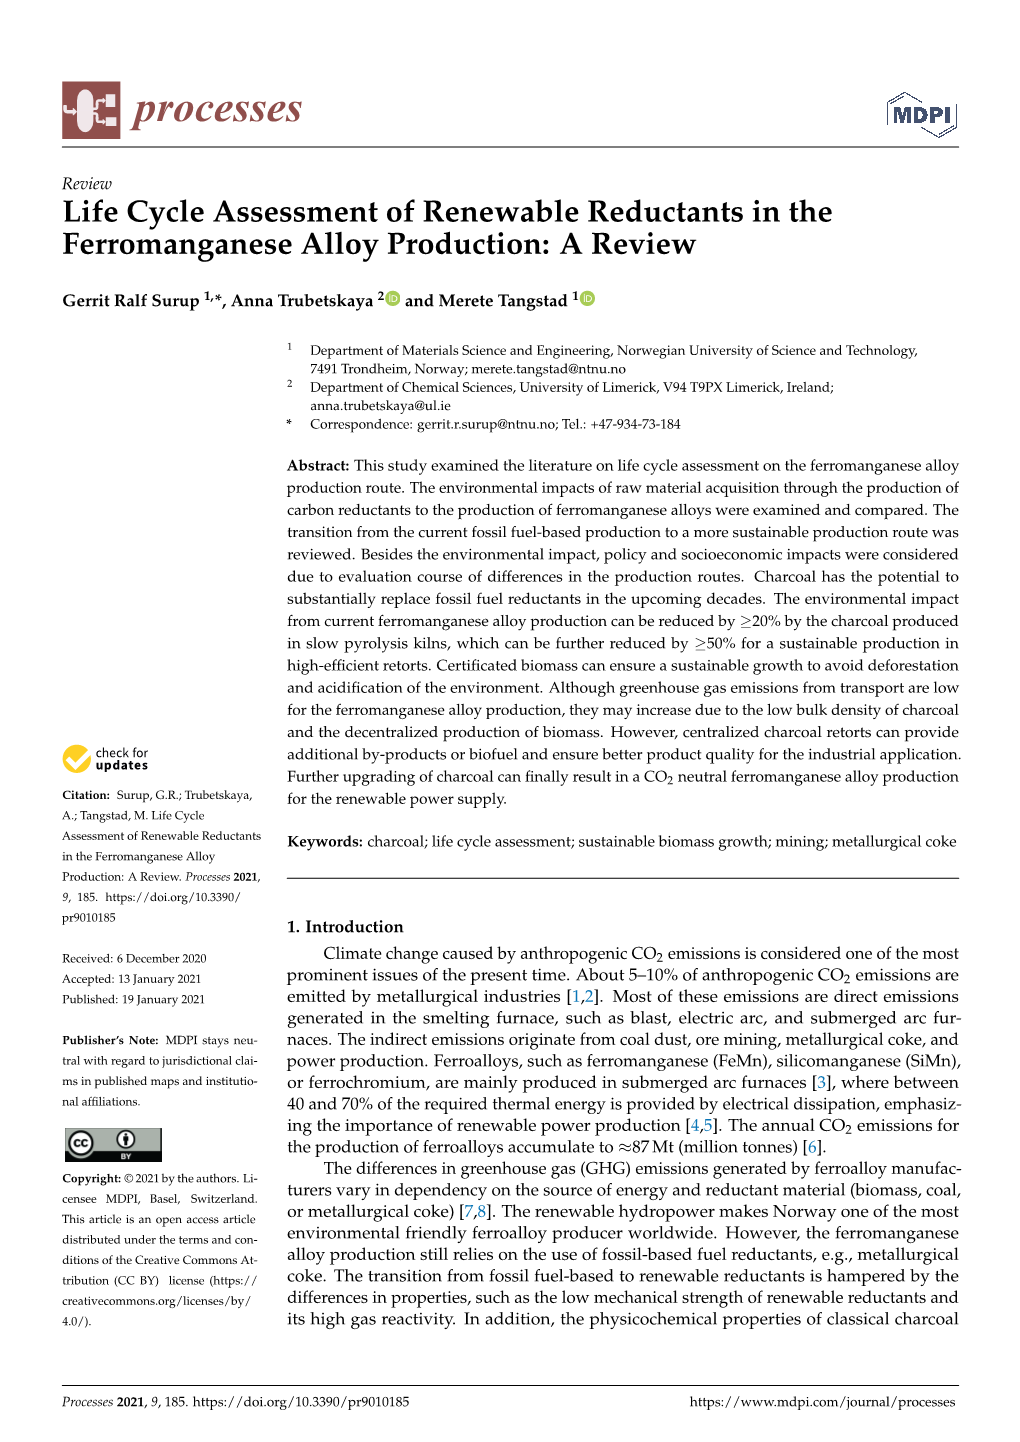 Life Cycle Assessment of Renewable Reductants in the Ferromanganese Alloy Production: a Review